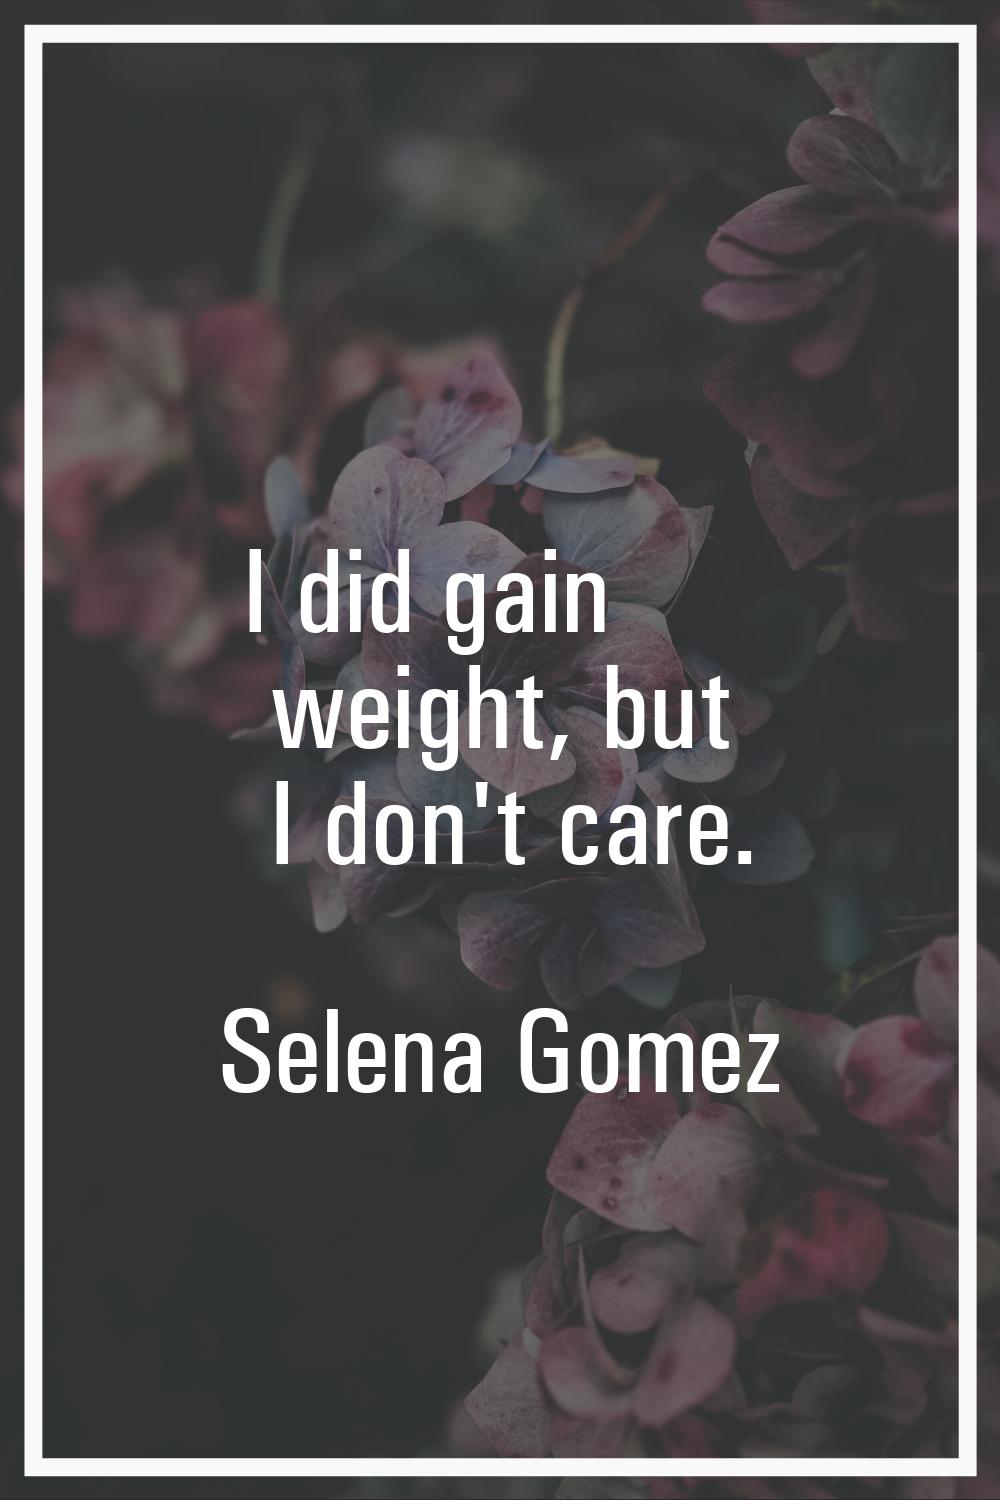 I did gain weight, but I don't care.